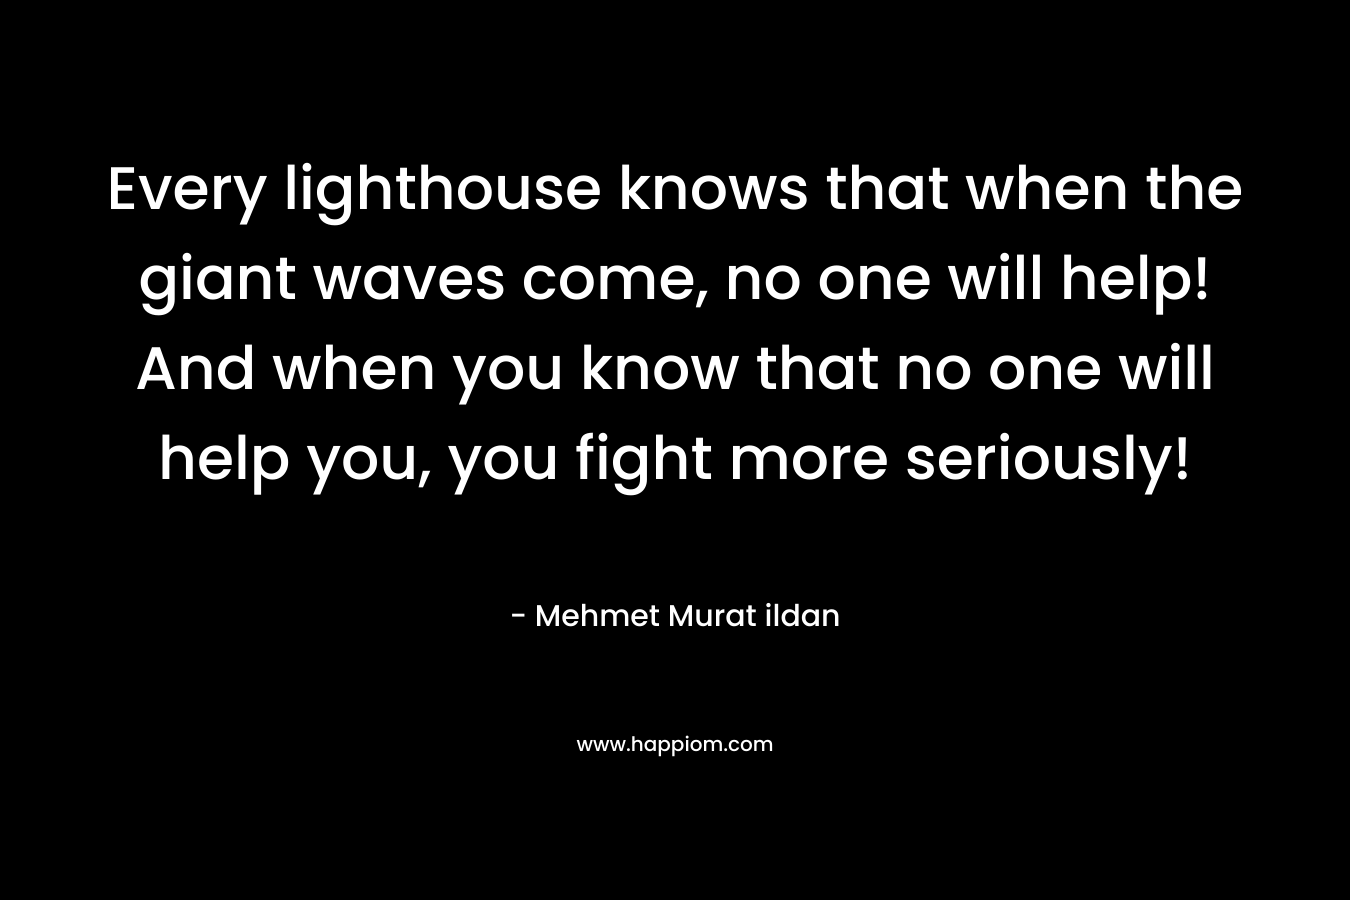 Every lighthouse knows that when the giant waves come, no one will help! And when you know that no one will help you, you fight more seriously! – Mehmet Murat ildan